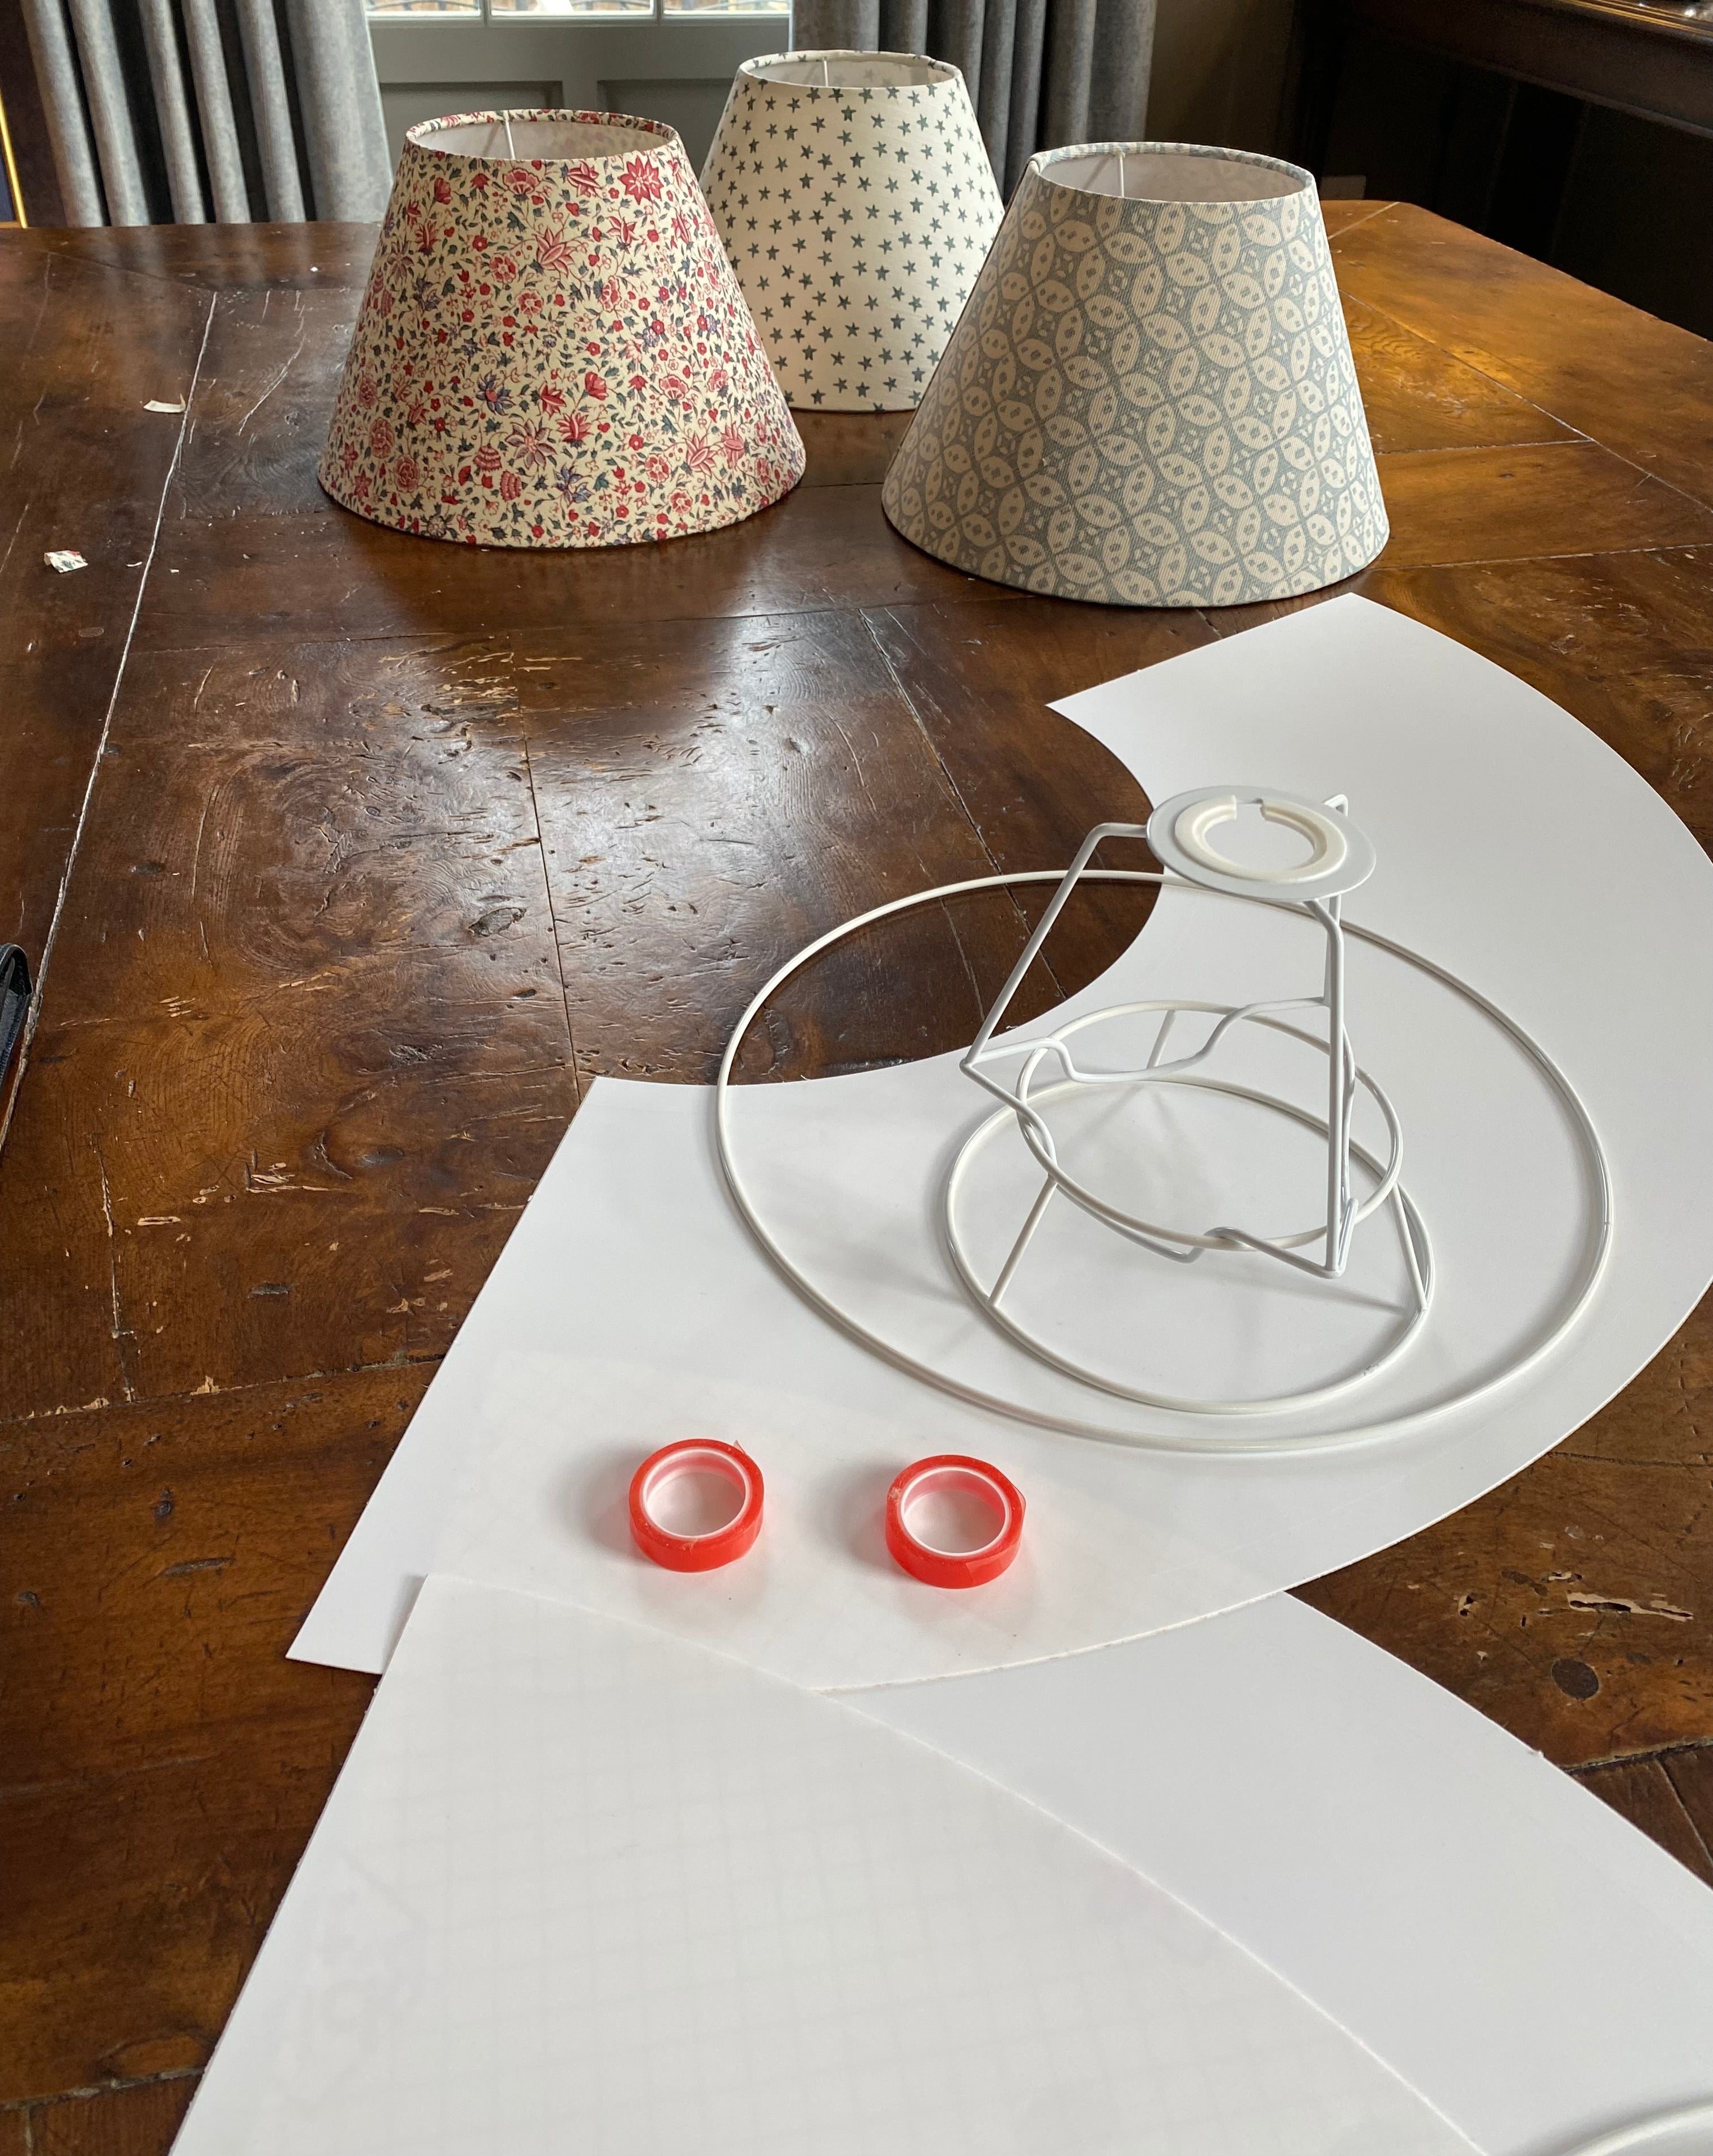 Lampshade Workshop for Beginners - 17th May 2024